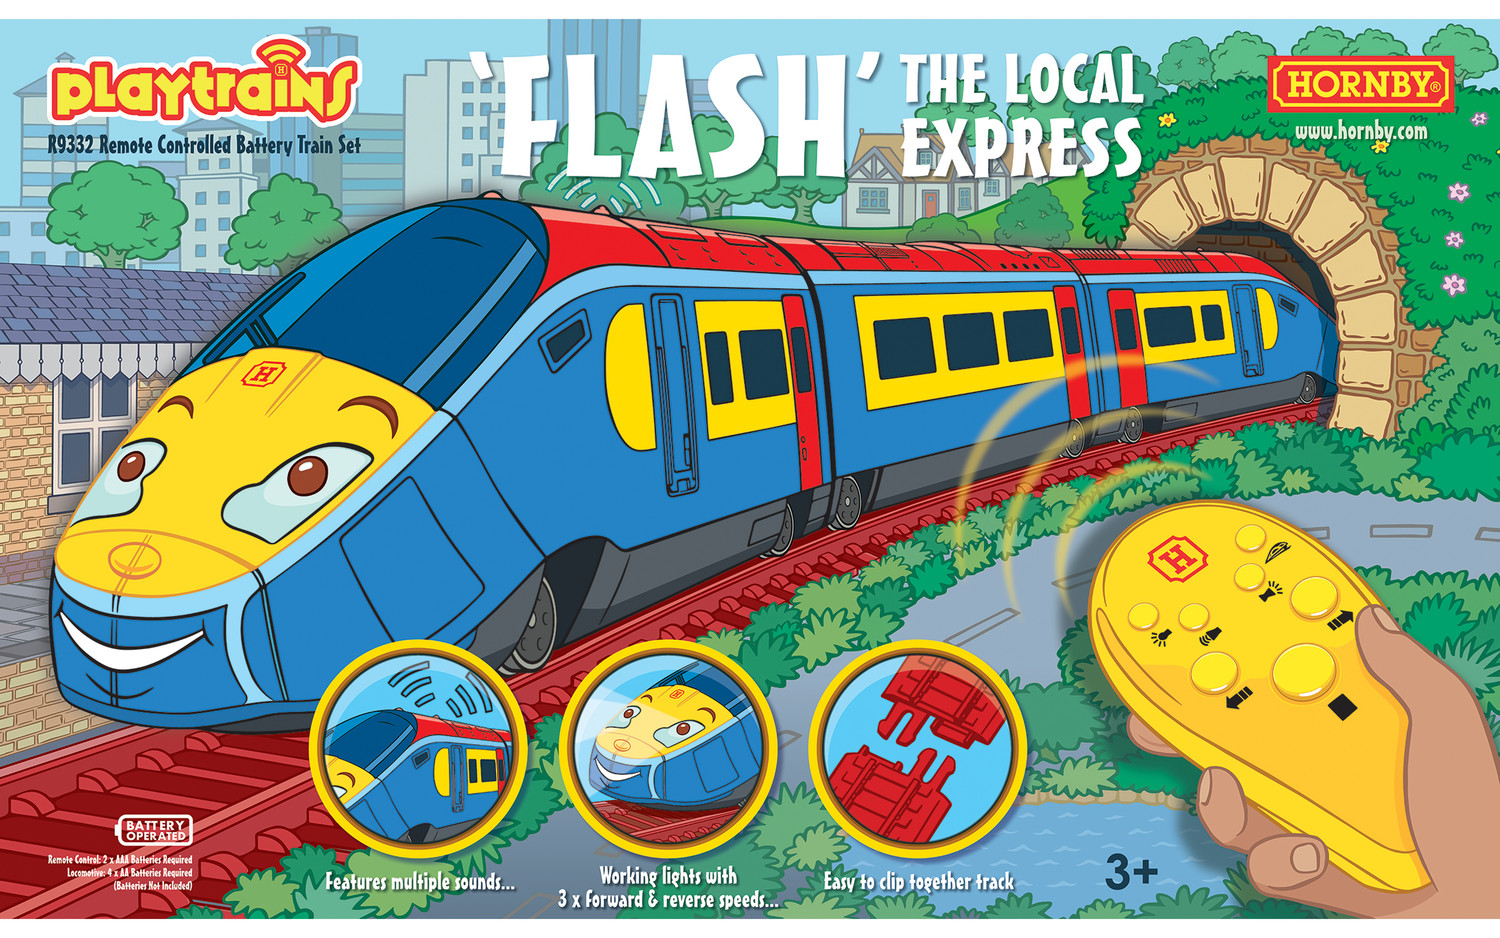 R9332 Hornby Playtrains Flash The Local Express Remote Train Set